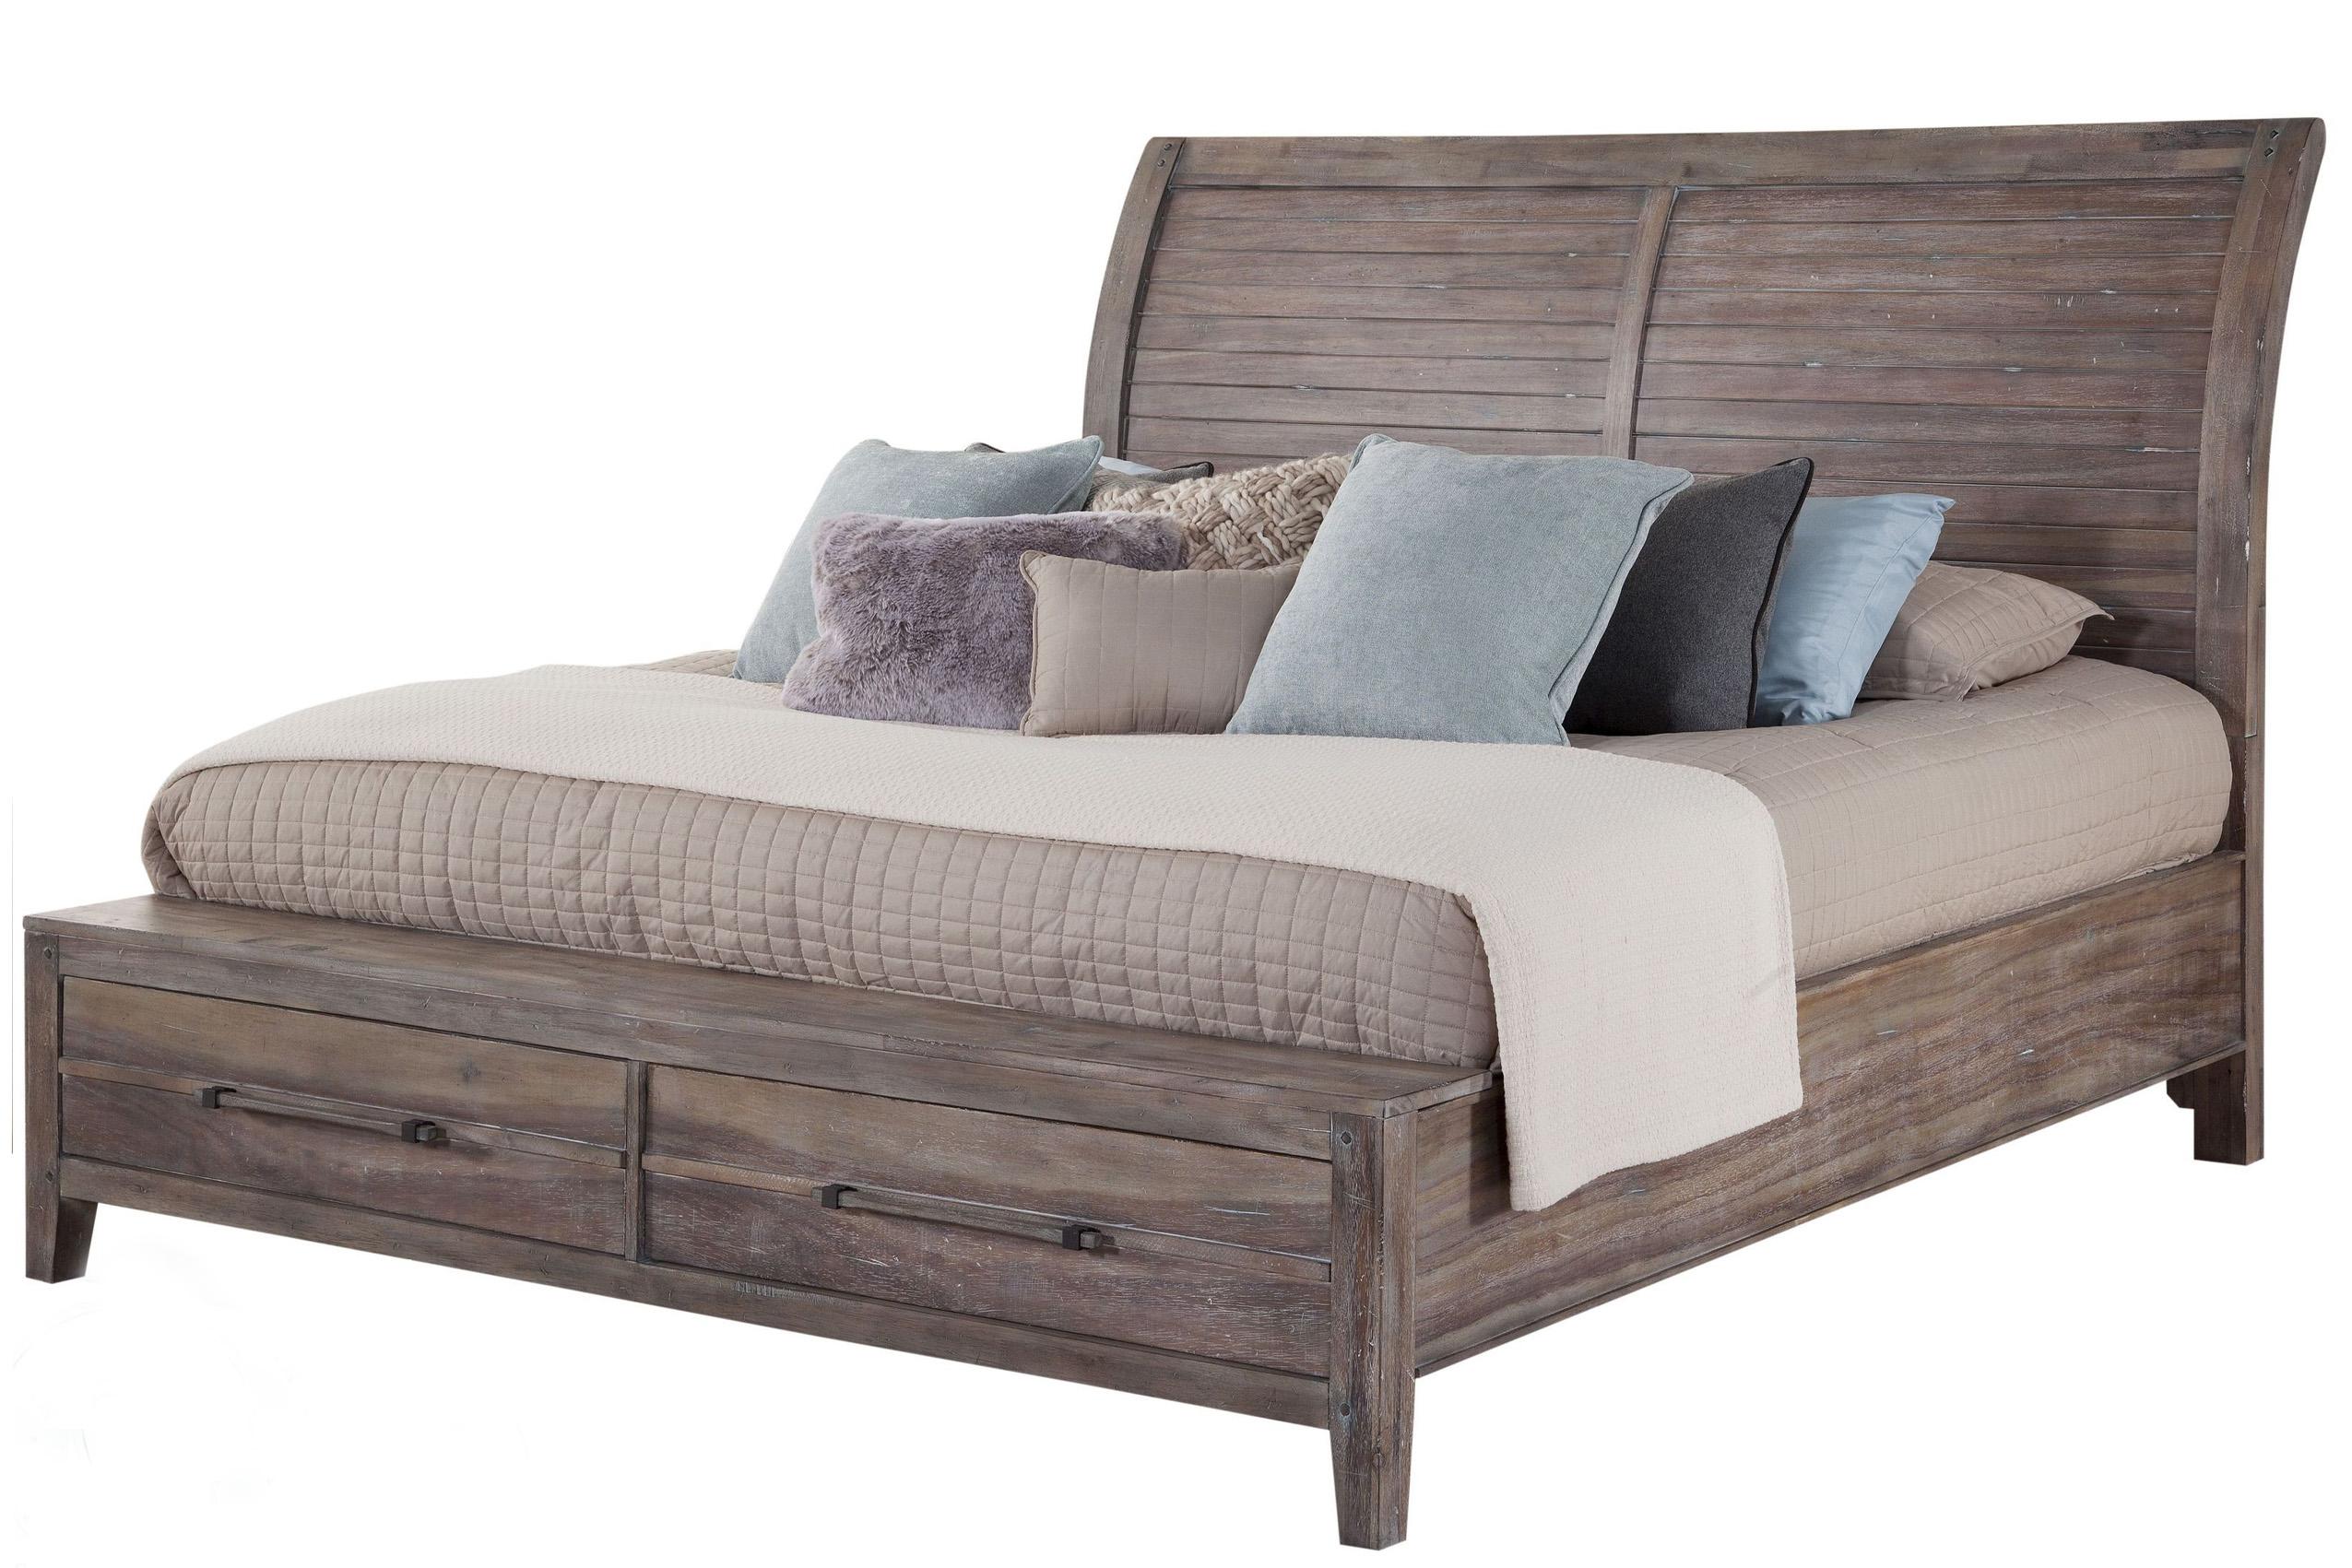 

    
American Woodcrafters AURORA 2800-50SLES Sleigh Bedroom Set Driftwood/Gray 2800-QSLST-3PC
